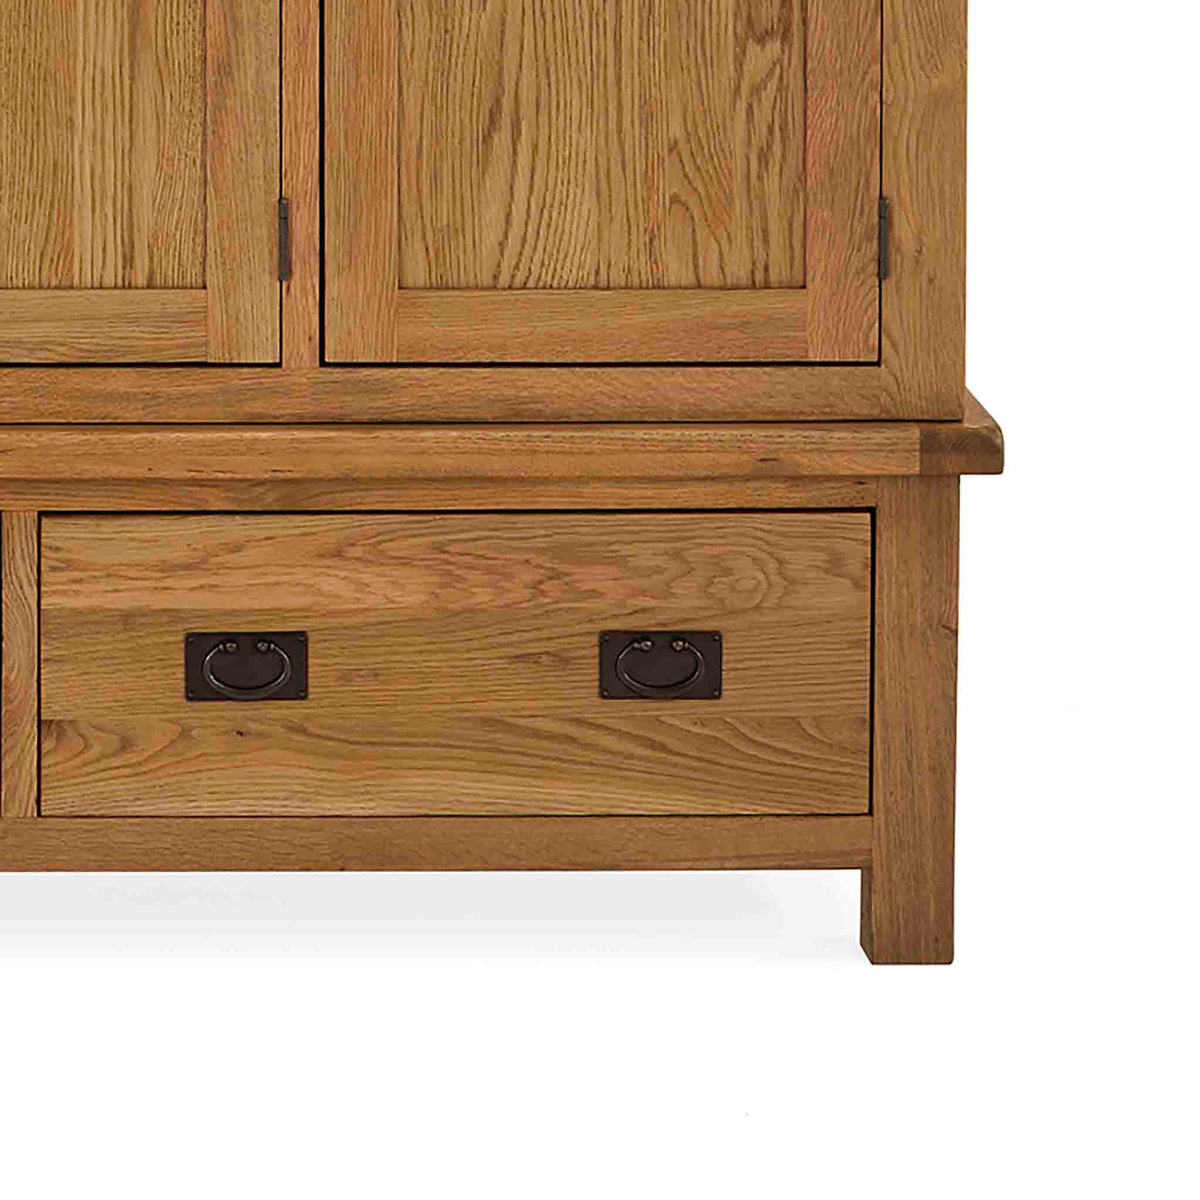 Zelah Oak Triple Wardrobe with Drawers - Close up of drawer front